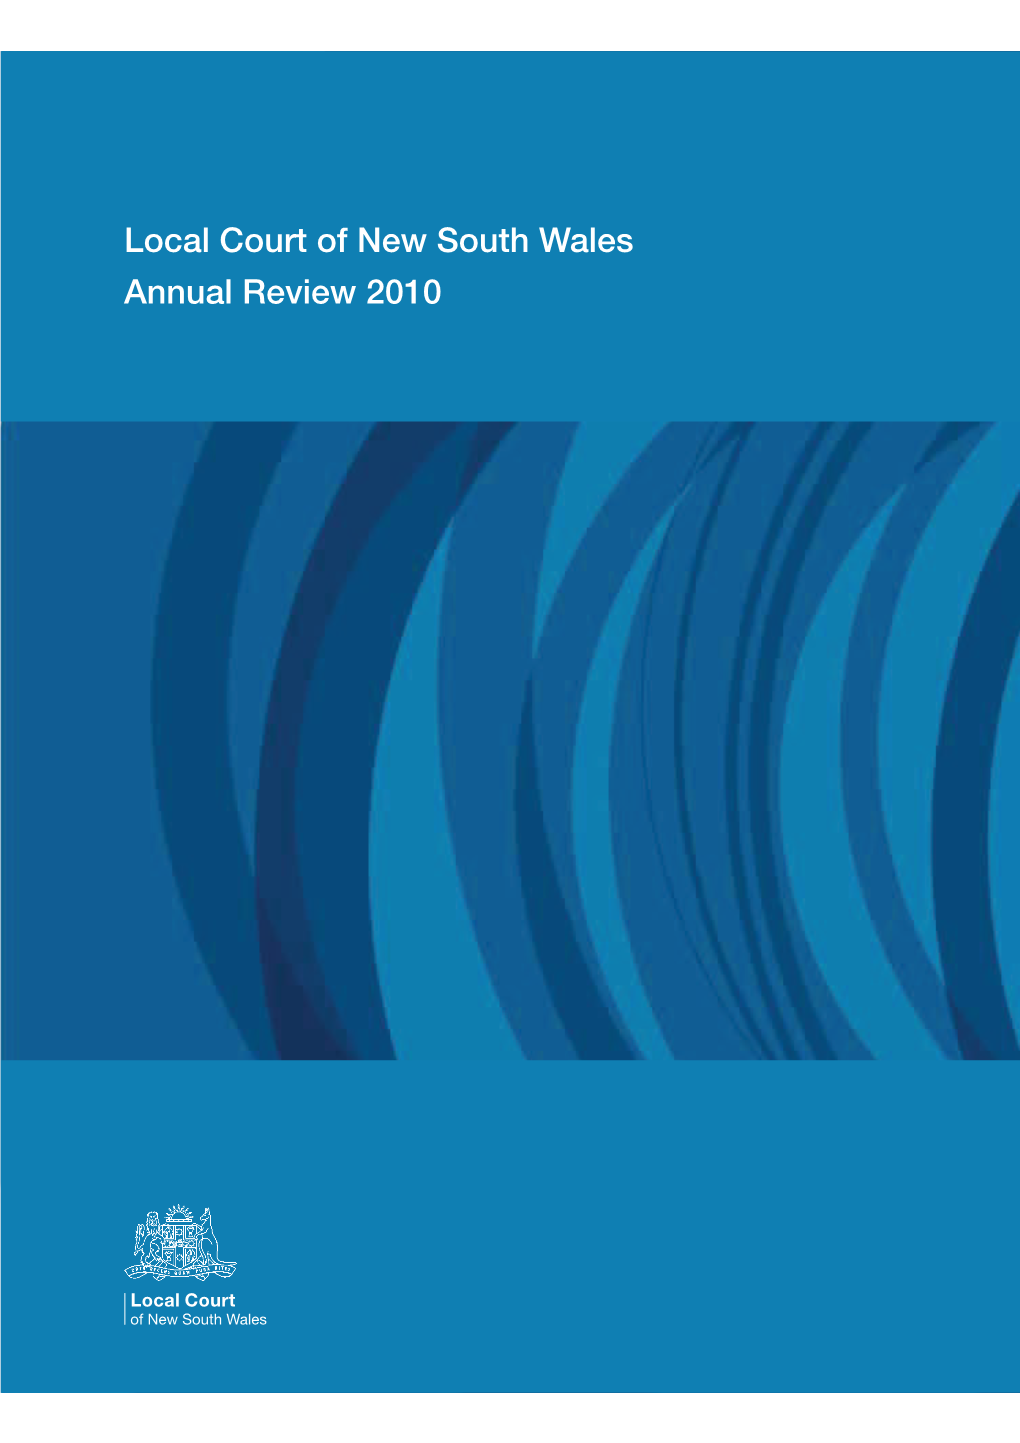 2010 Local Court Annual Review